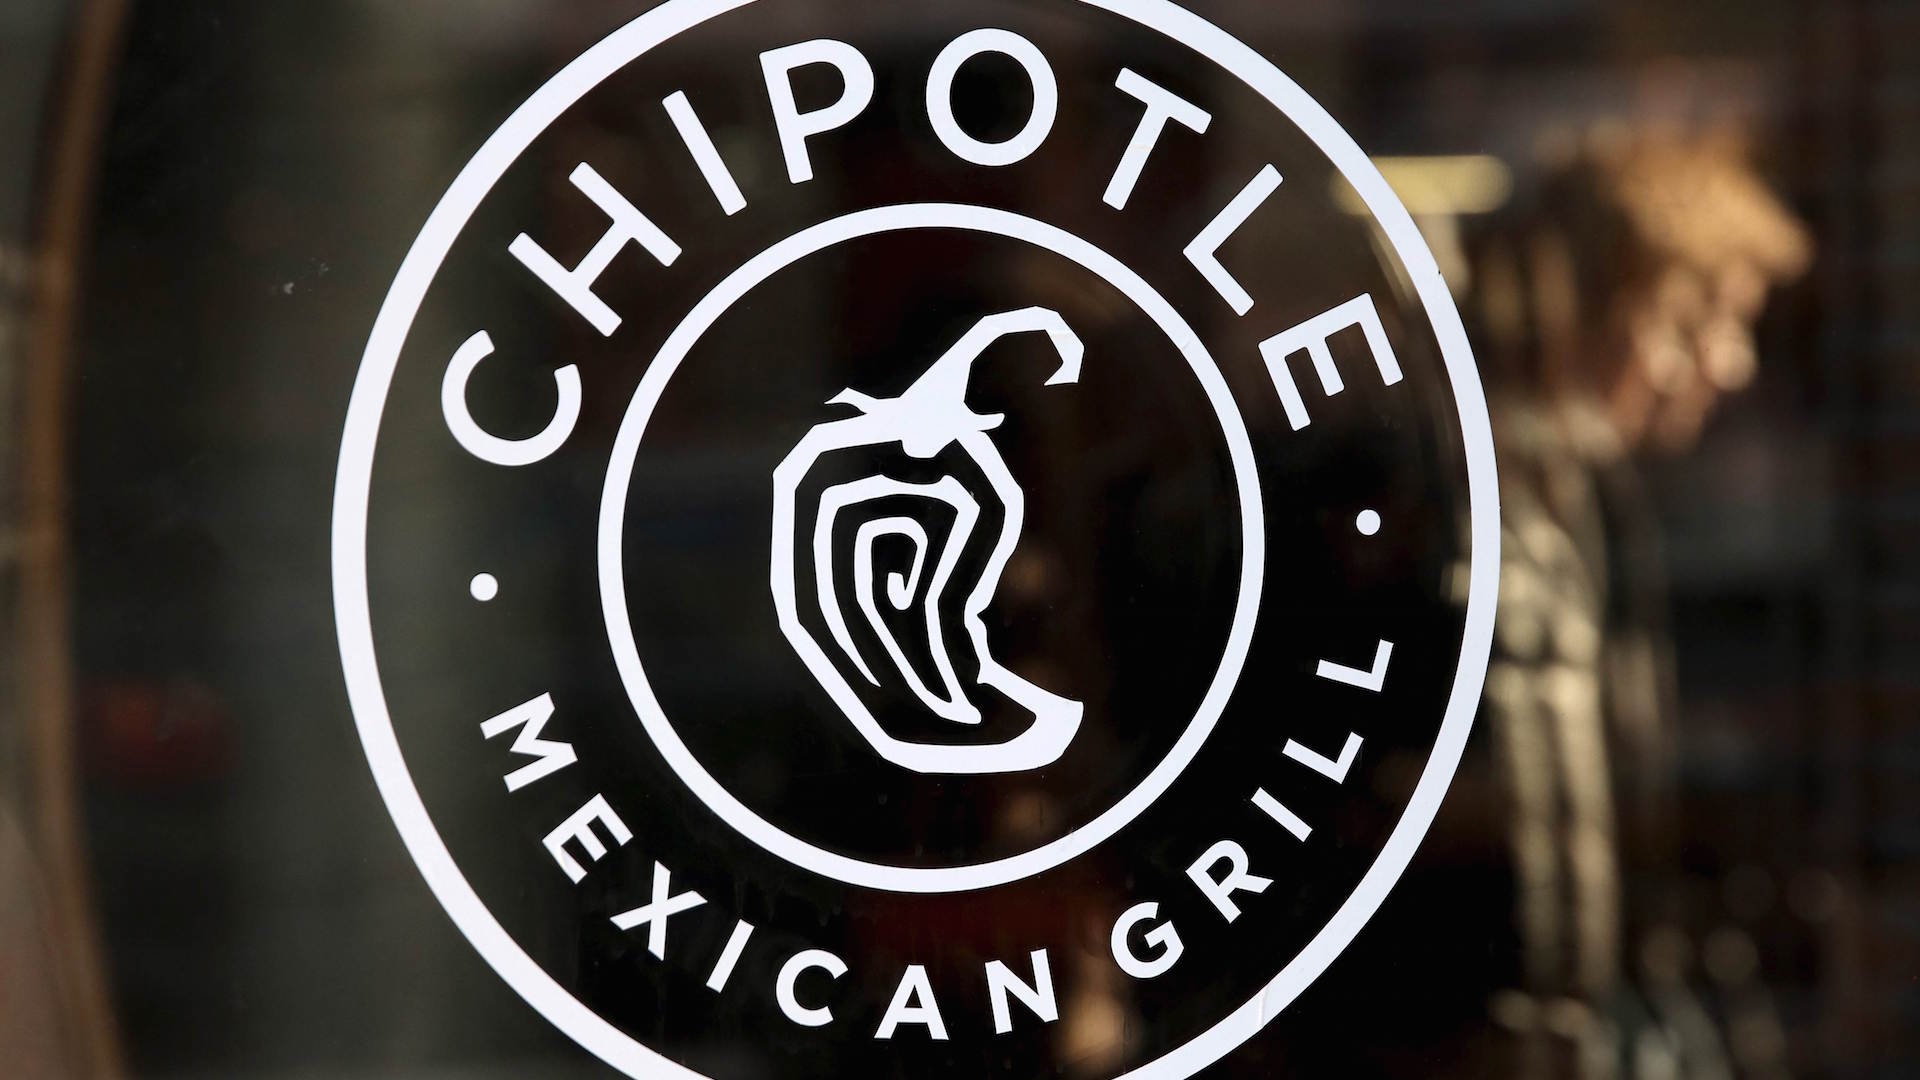 Chipotle: The chain of fast casual dining, Food safety, Black and white, The dried chili jalapeno. 1920x1080 Full HD Wallpaper.